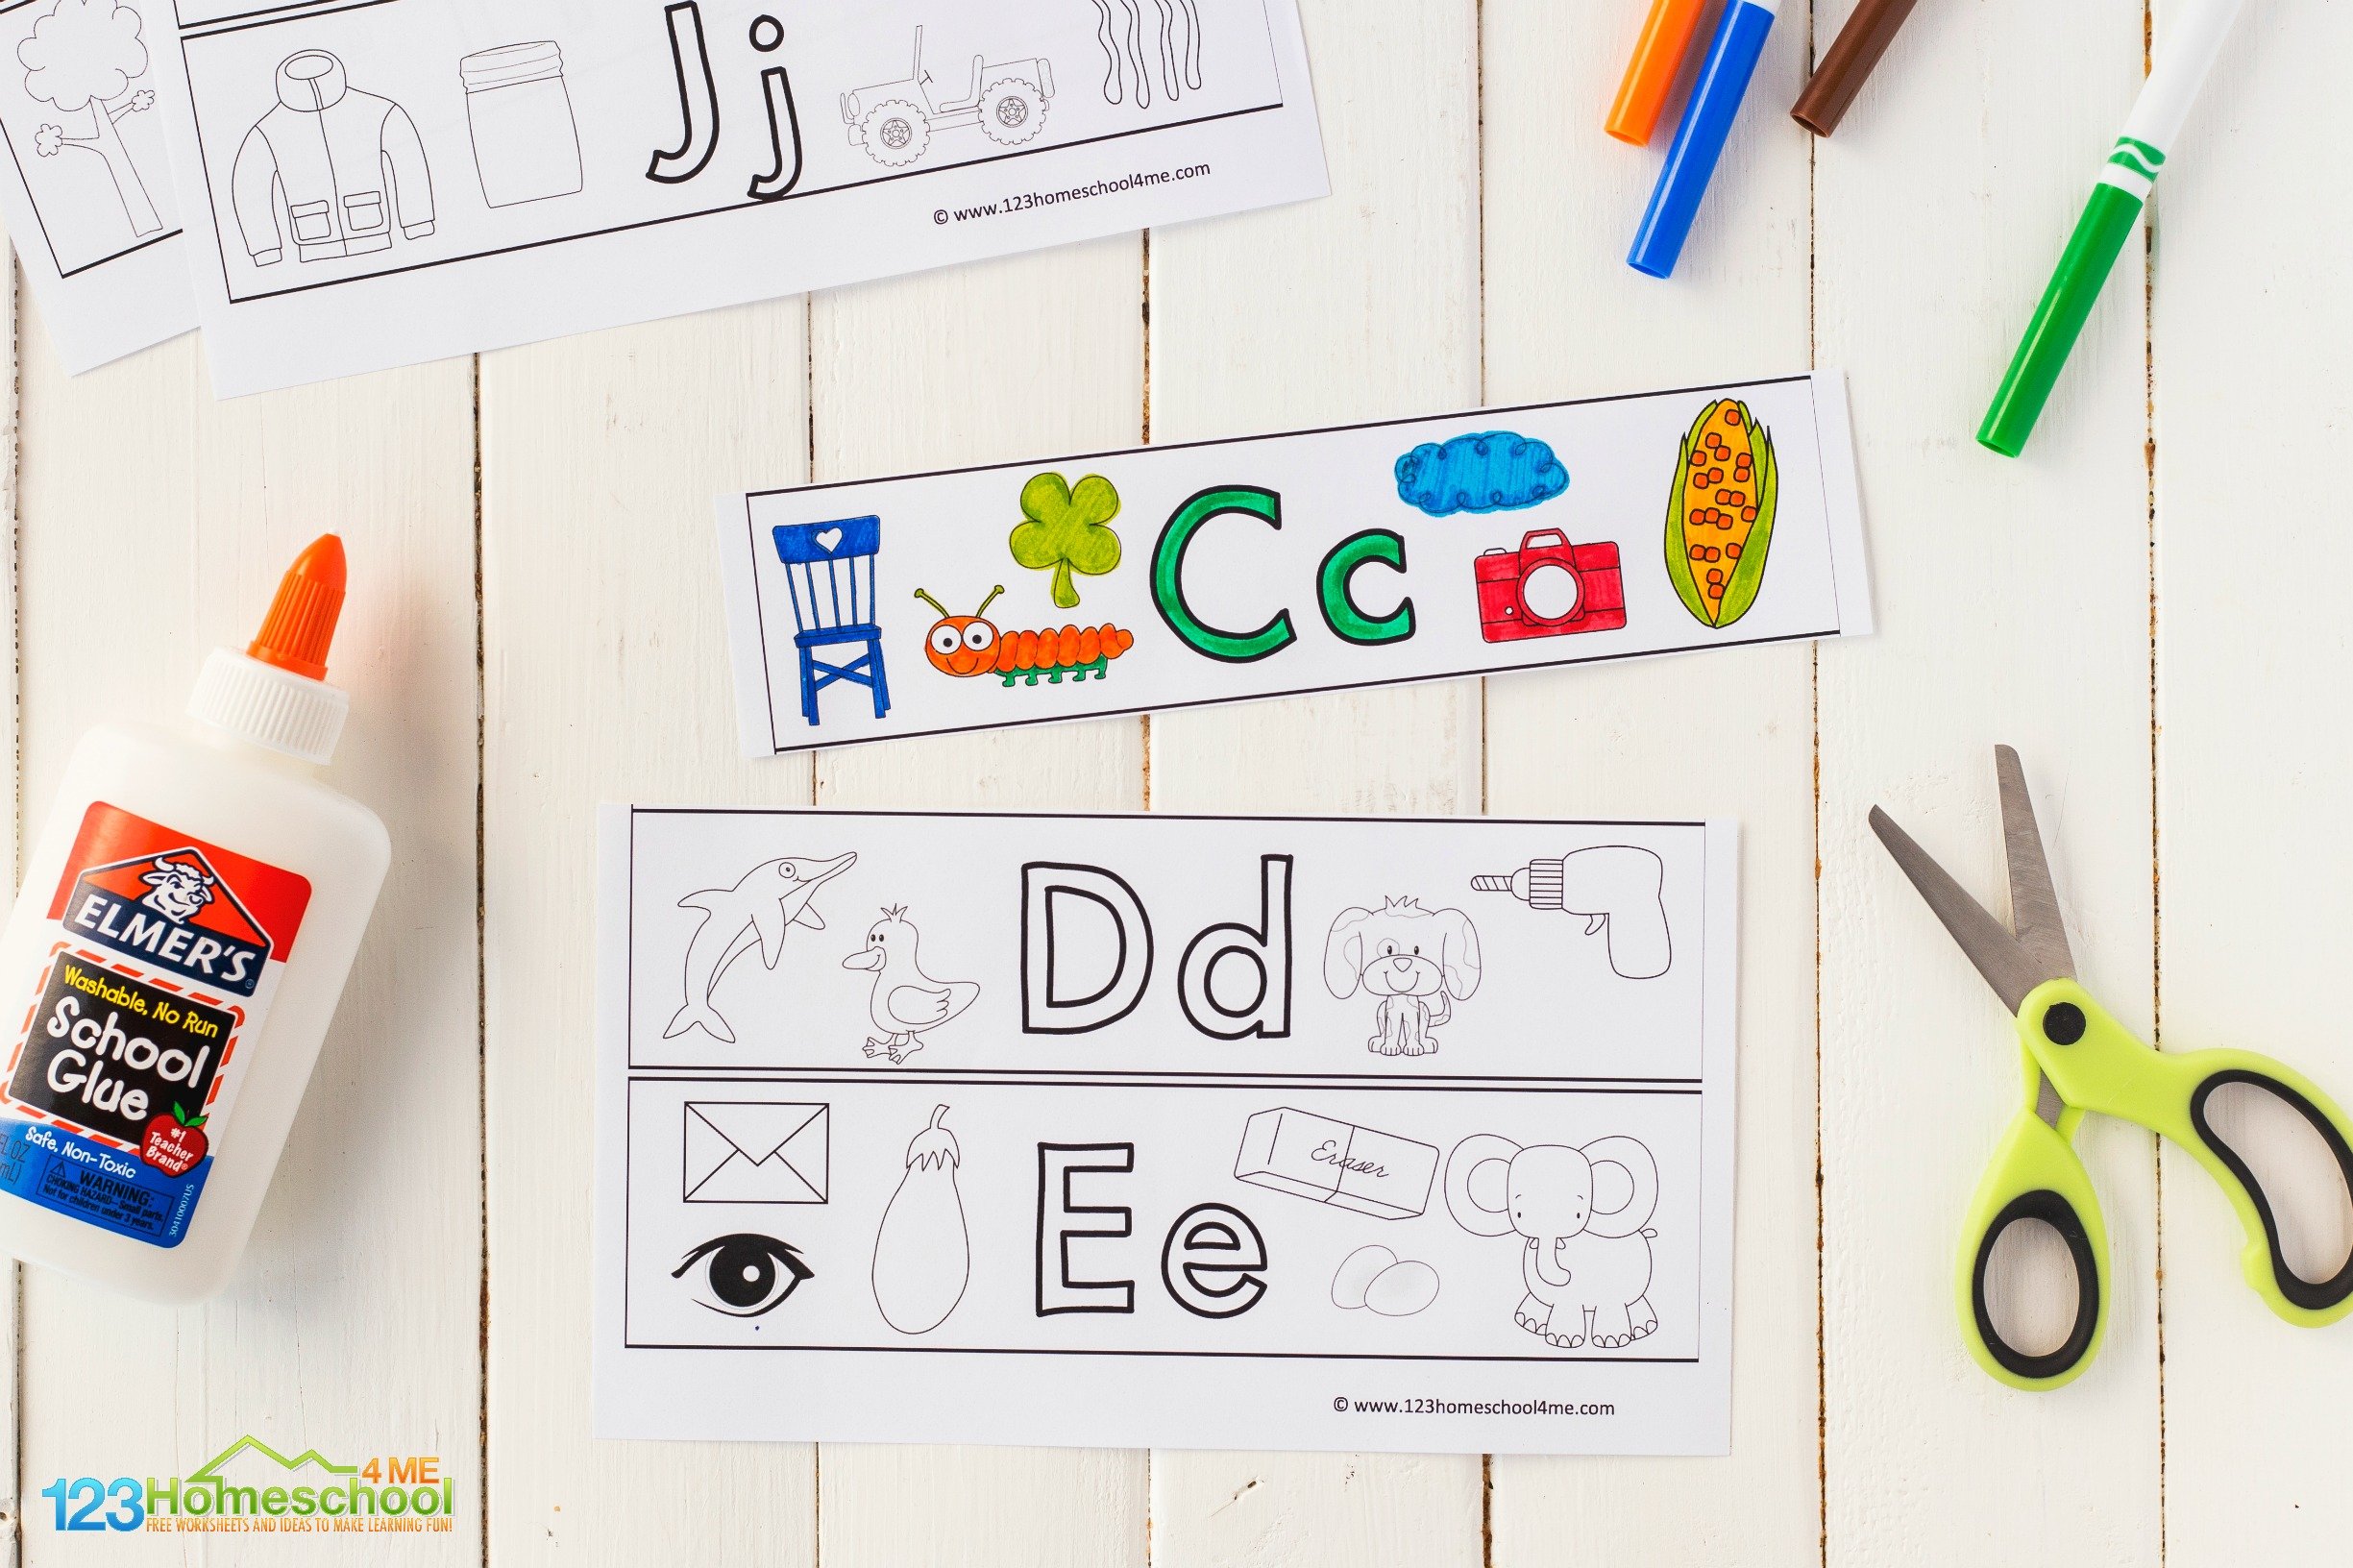 super cute alphabet printables to make letter bracelets or cuffs to learn the letters of the alphabet A to Z